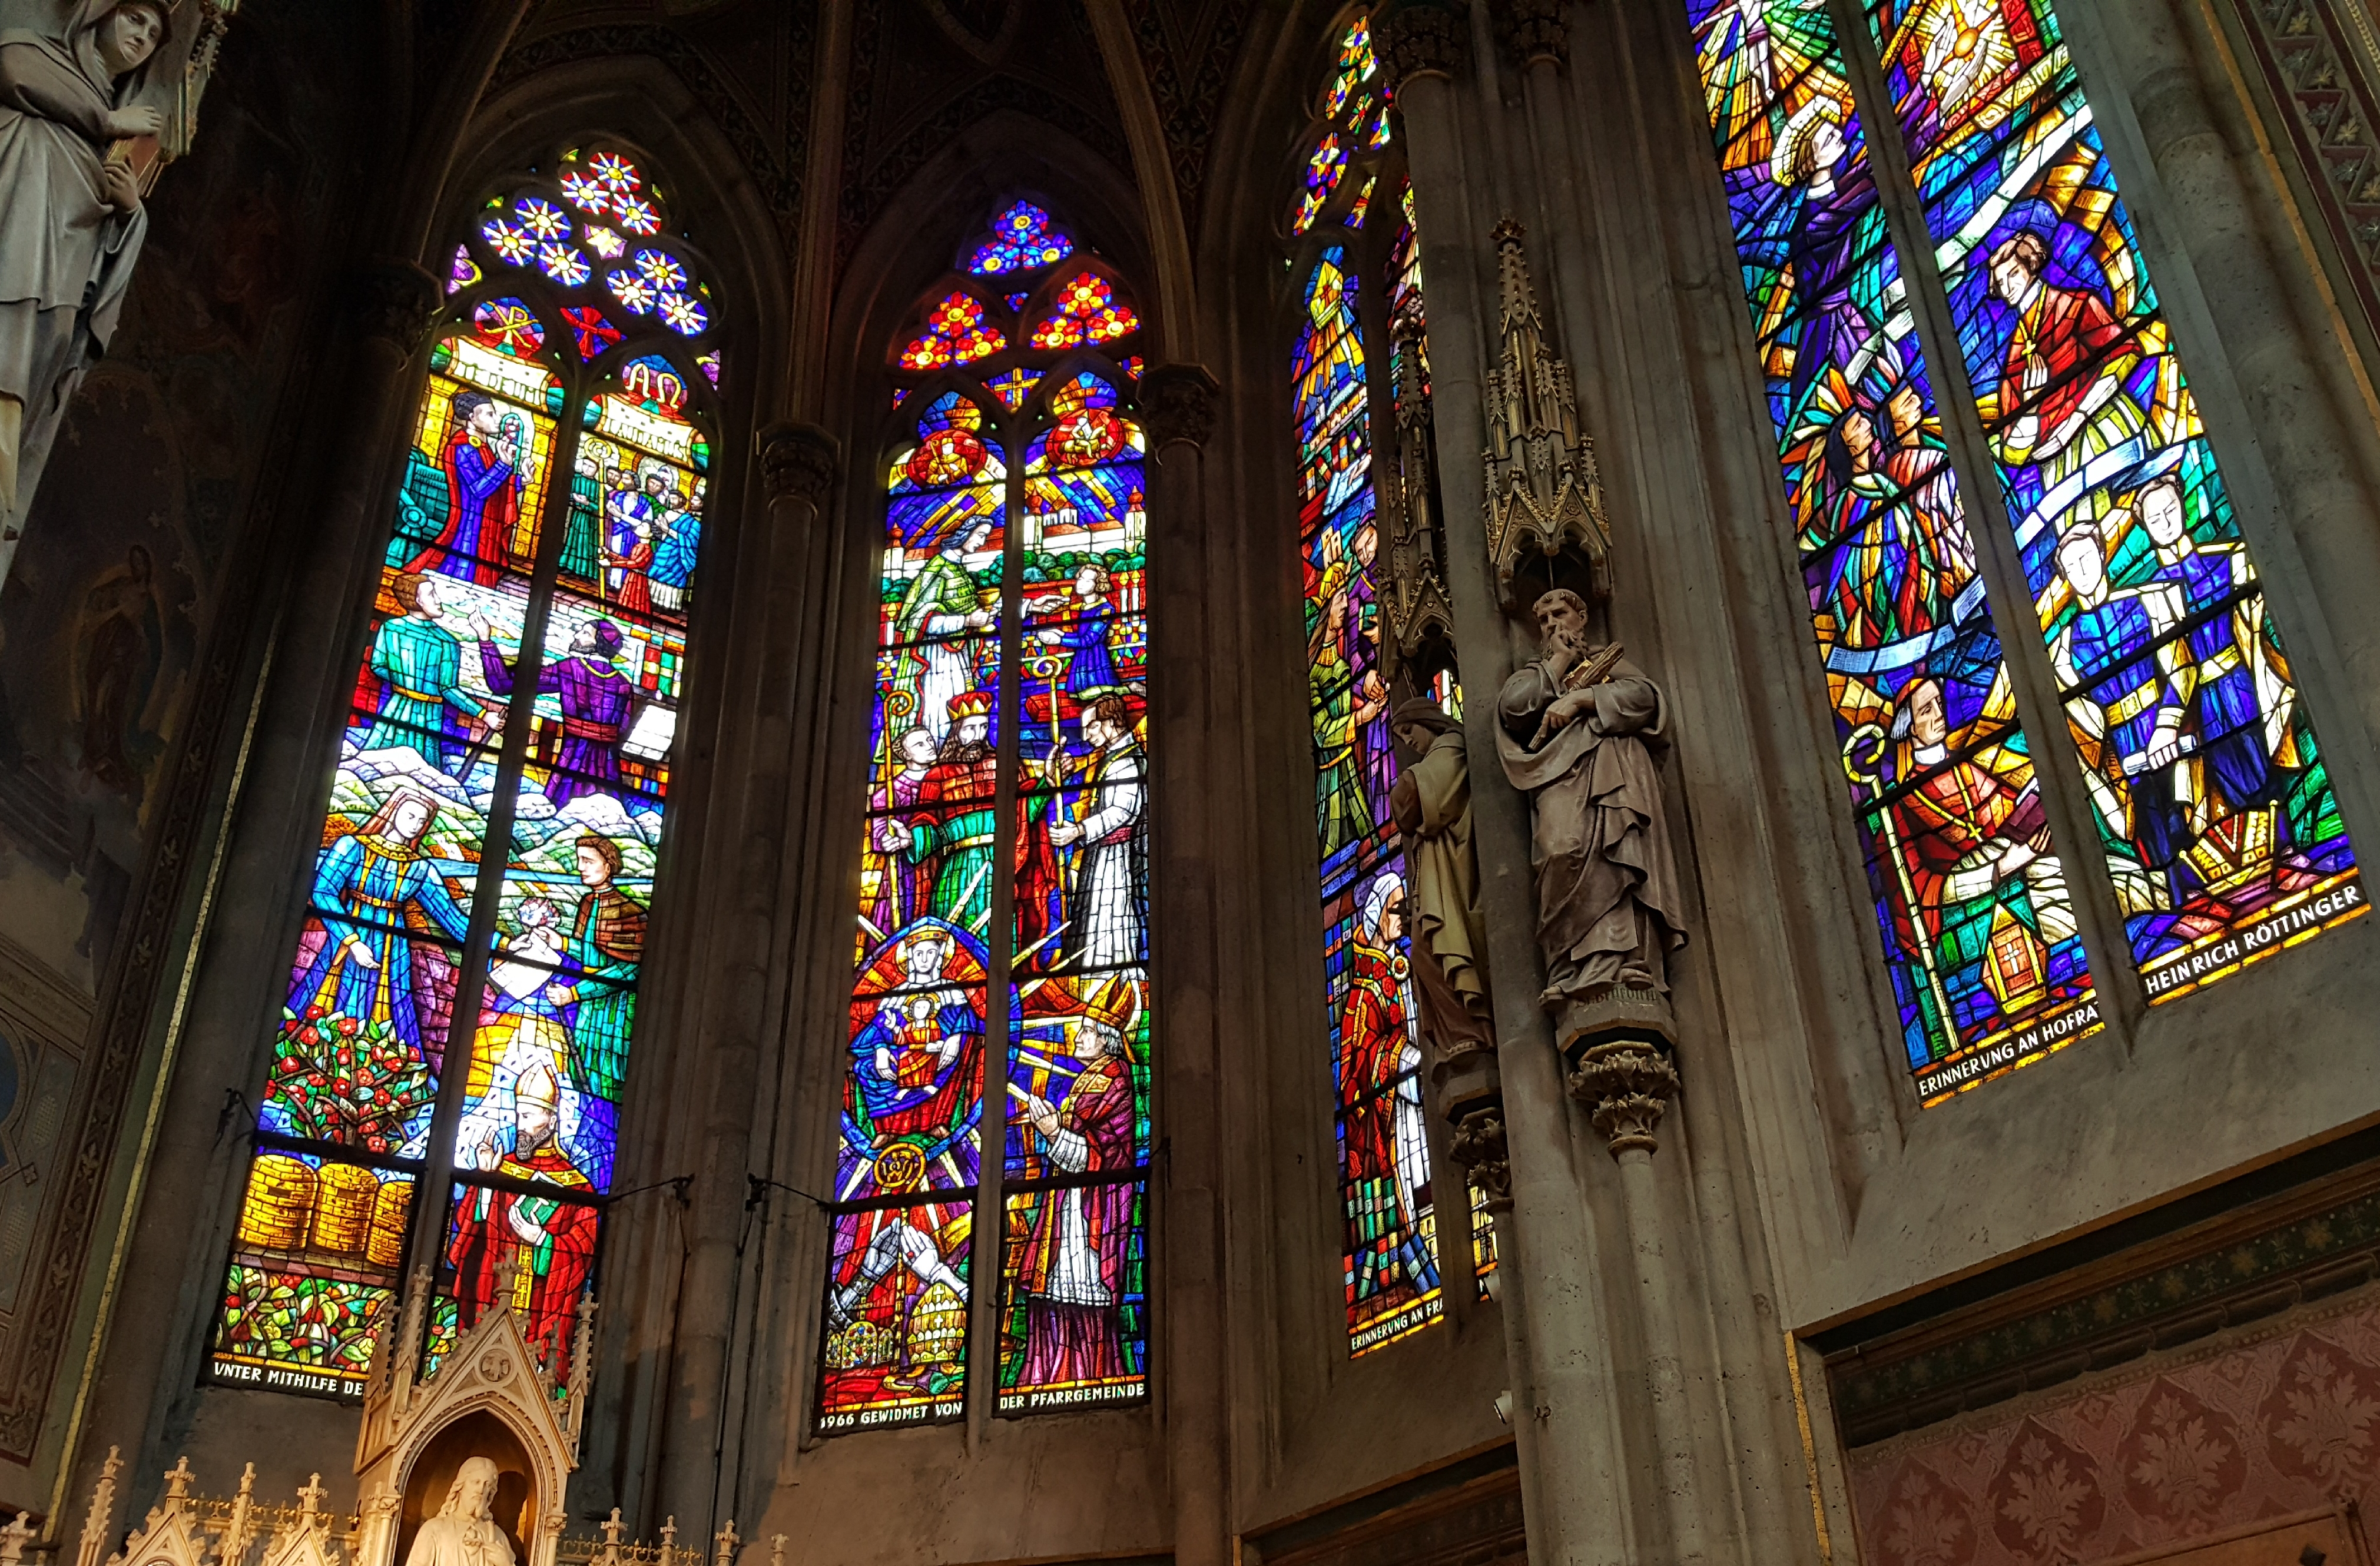 Stained glass in Votivkirche. Photo by Dragonfly Leathrum